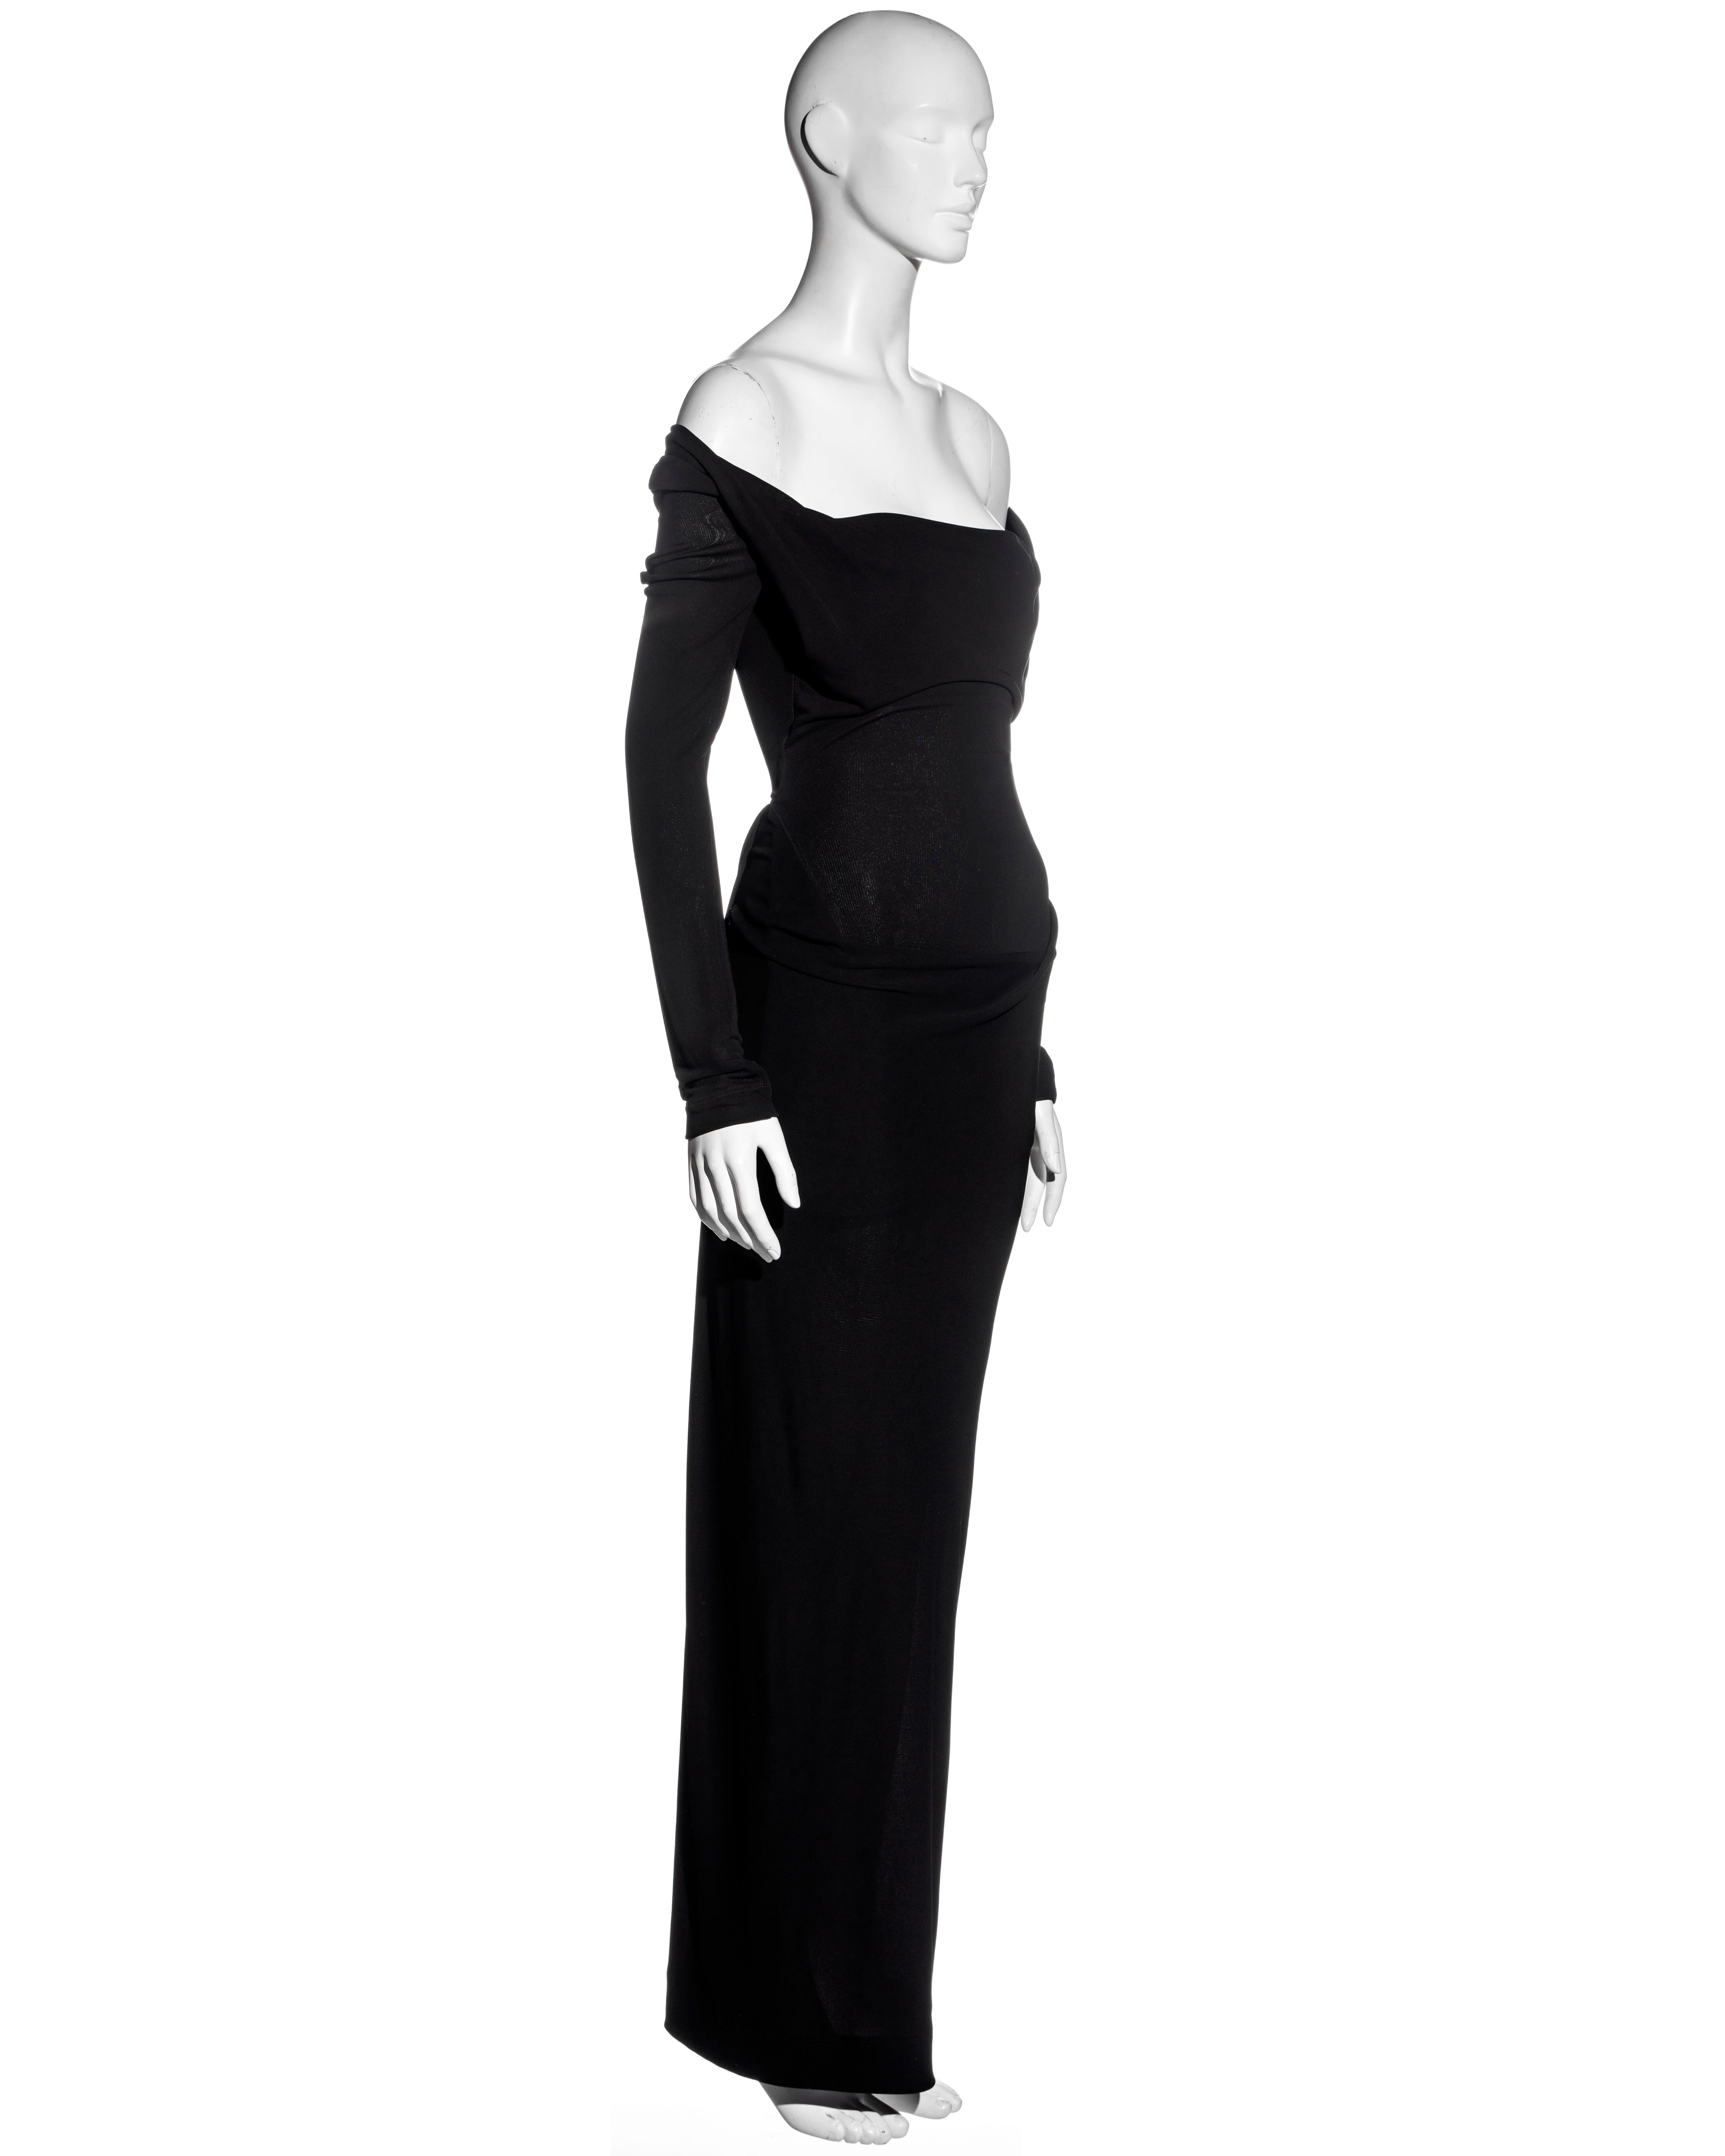 ▪ Vivienne Westwood black rayon evening maxi dress
▪ Off-shoulder 
▪ Cowl neck 
▪ Long fitted sleeves 
▪ Full-length skirt with draped detail at the hips 
▪ Diagonal concealed zipper at the side seam
▪ UK 10 
▪ Fall-Winter 1997
▪ 100% Rayon